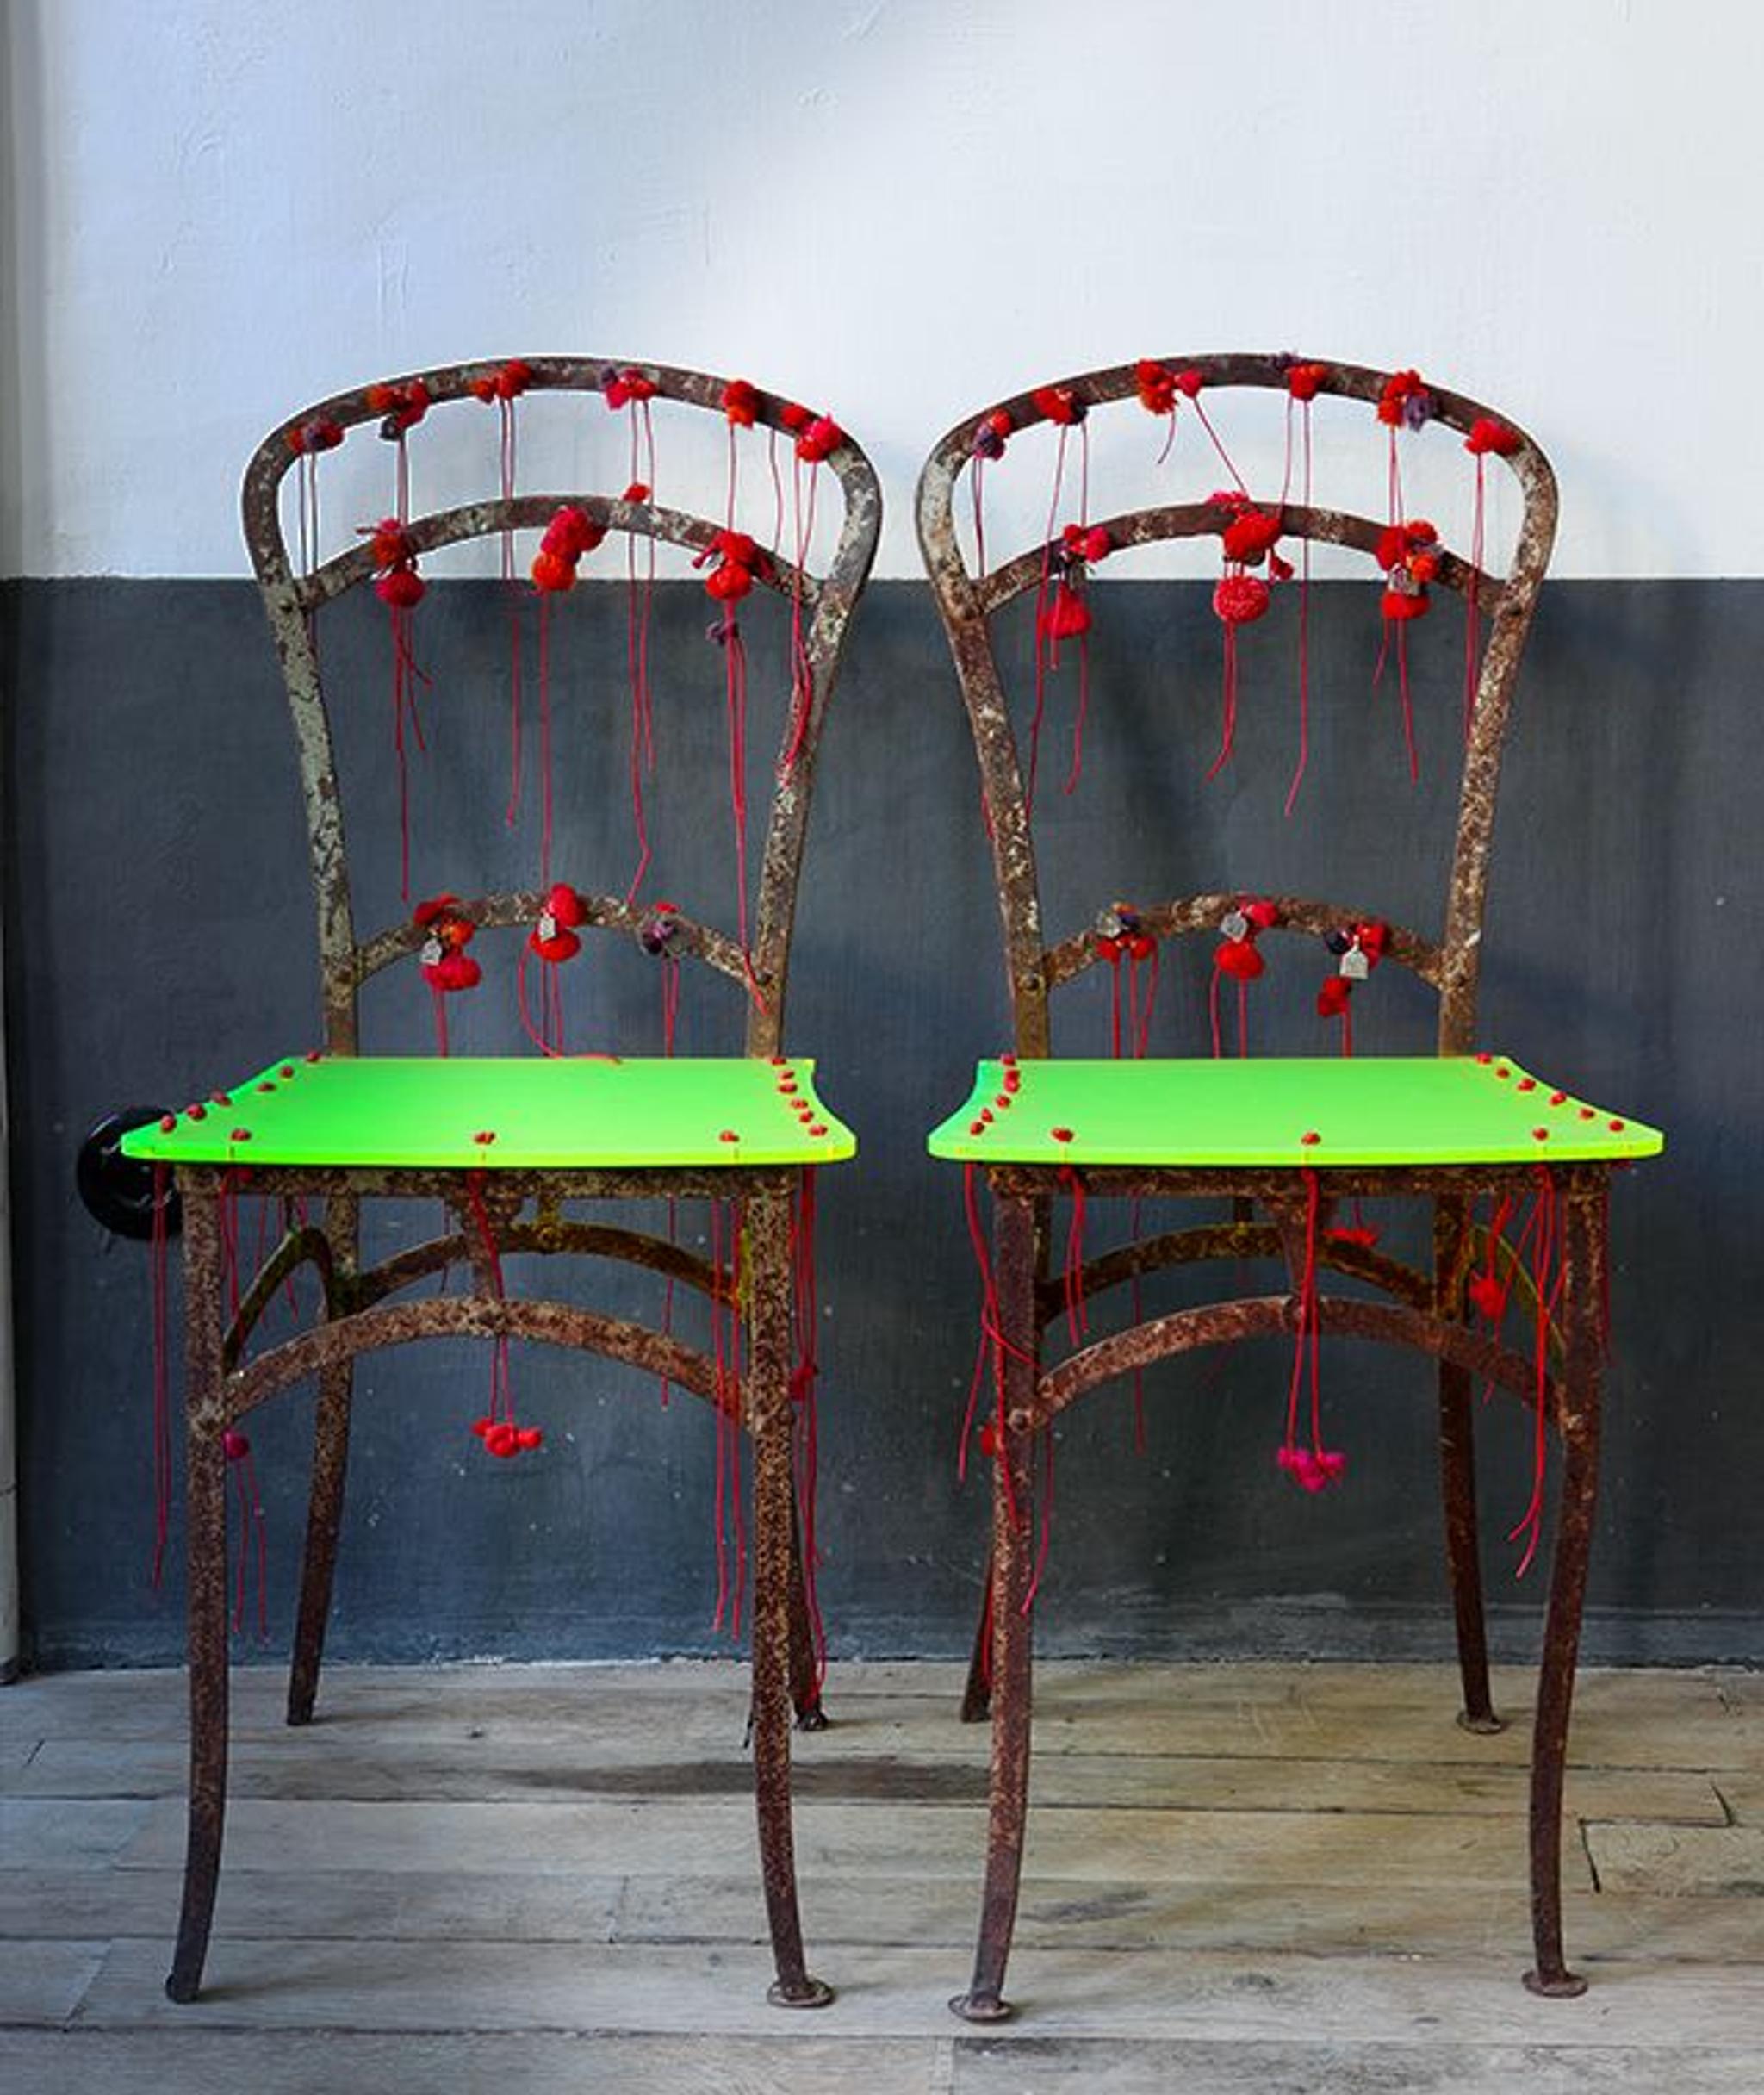 Chairs by Paola Navone. Photography by Enrico Conti